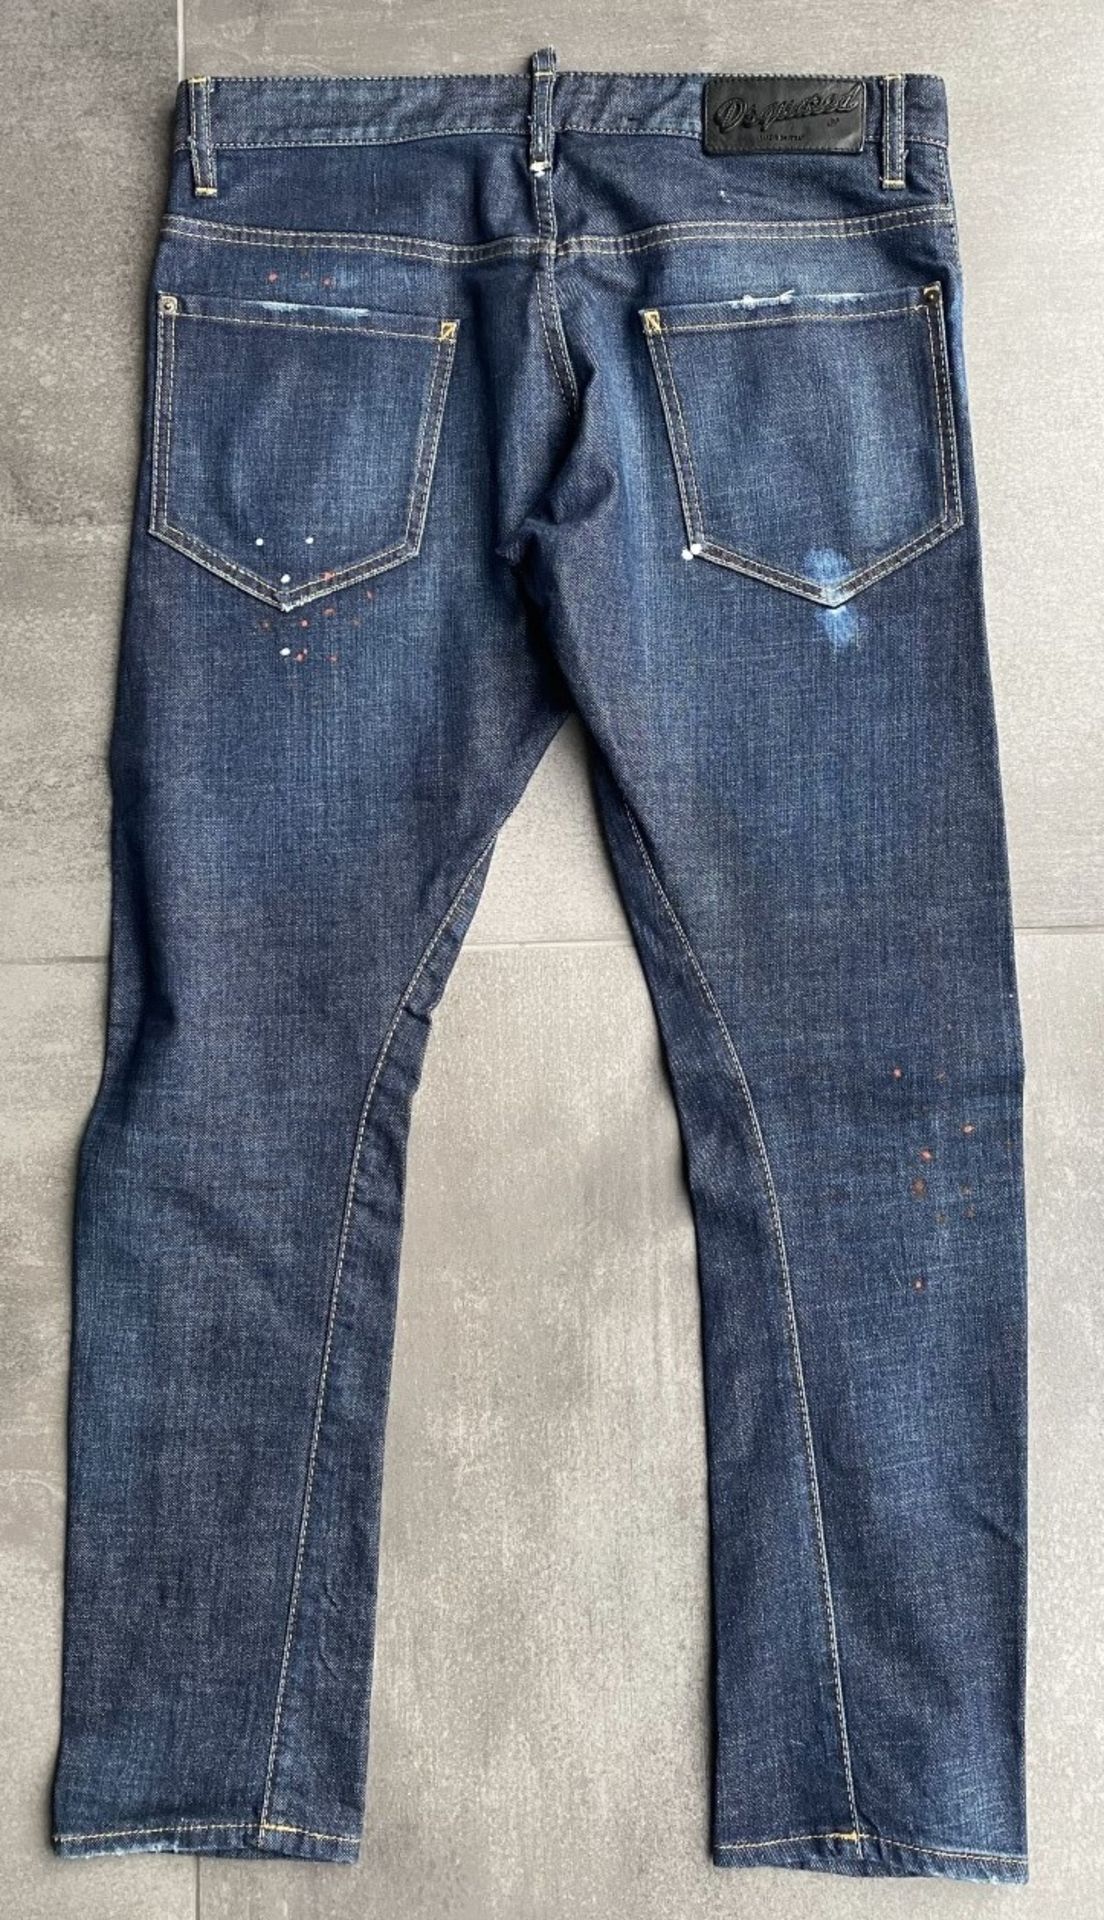 1 x Pair Of Men's Genuine Dsquared2 Jeans In Dark Blue - Size: 48 - Preowned In Very Good - Image 8 of 9